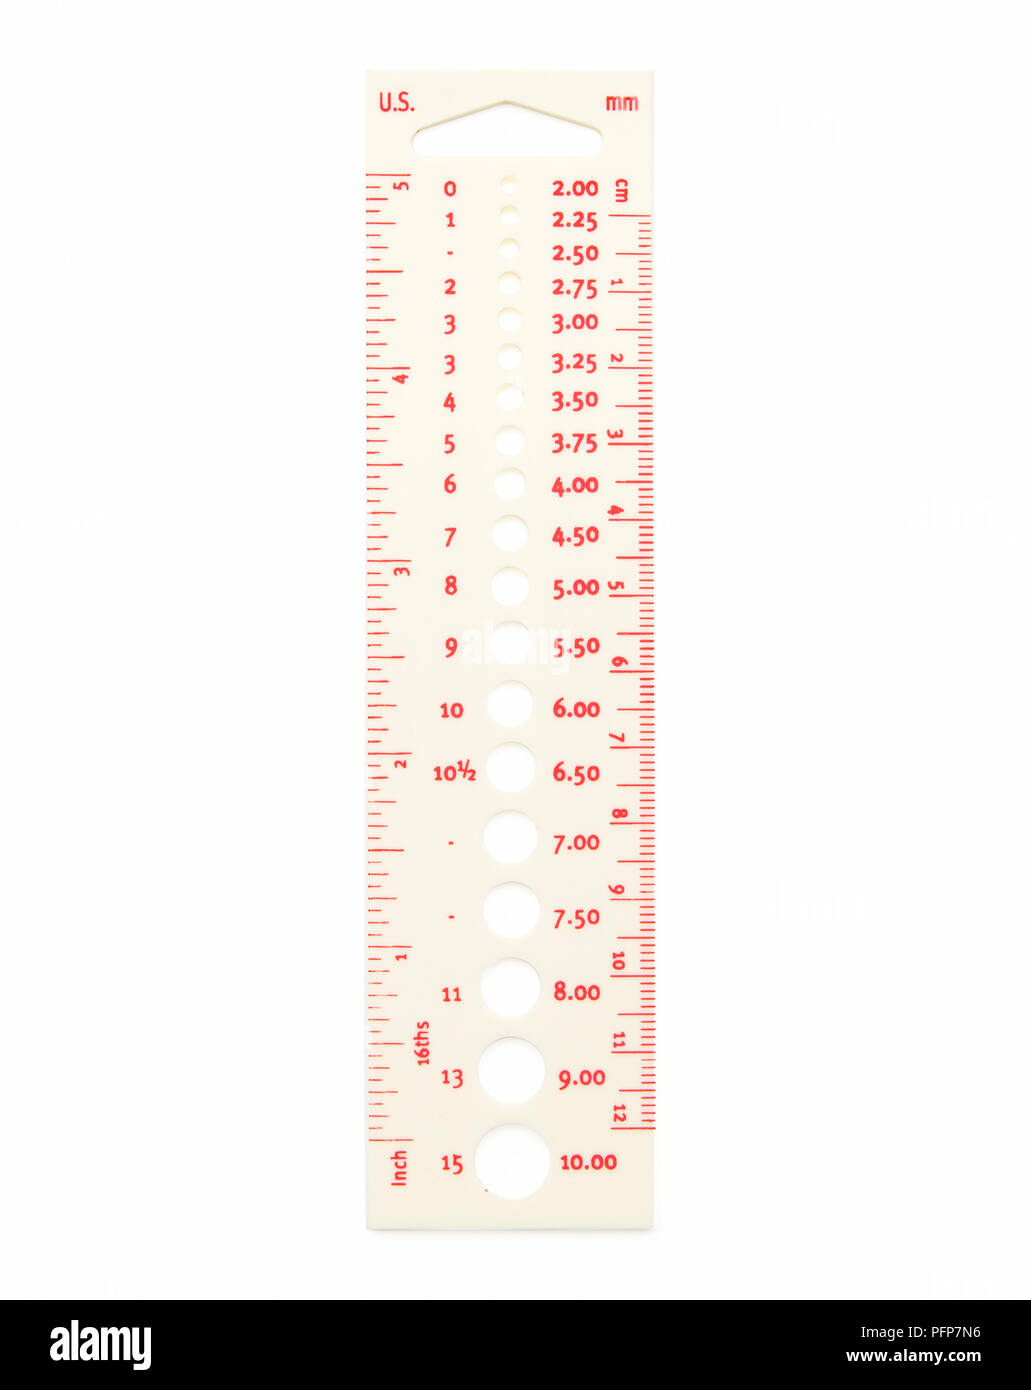 Knitting Needle Gauge Ruler With Measurements In Inches And